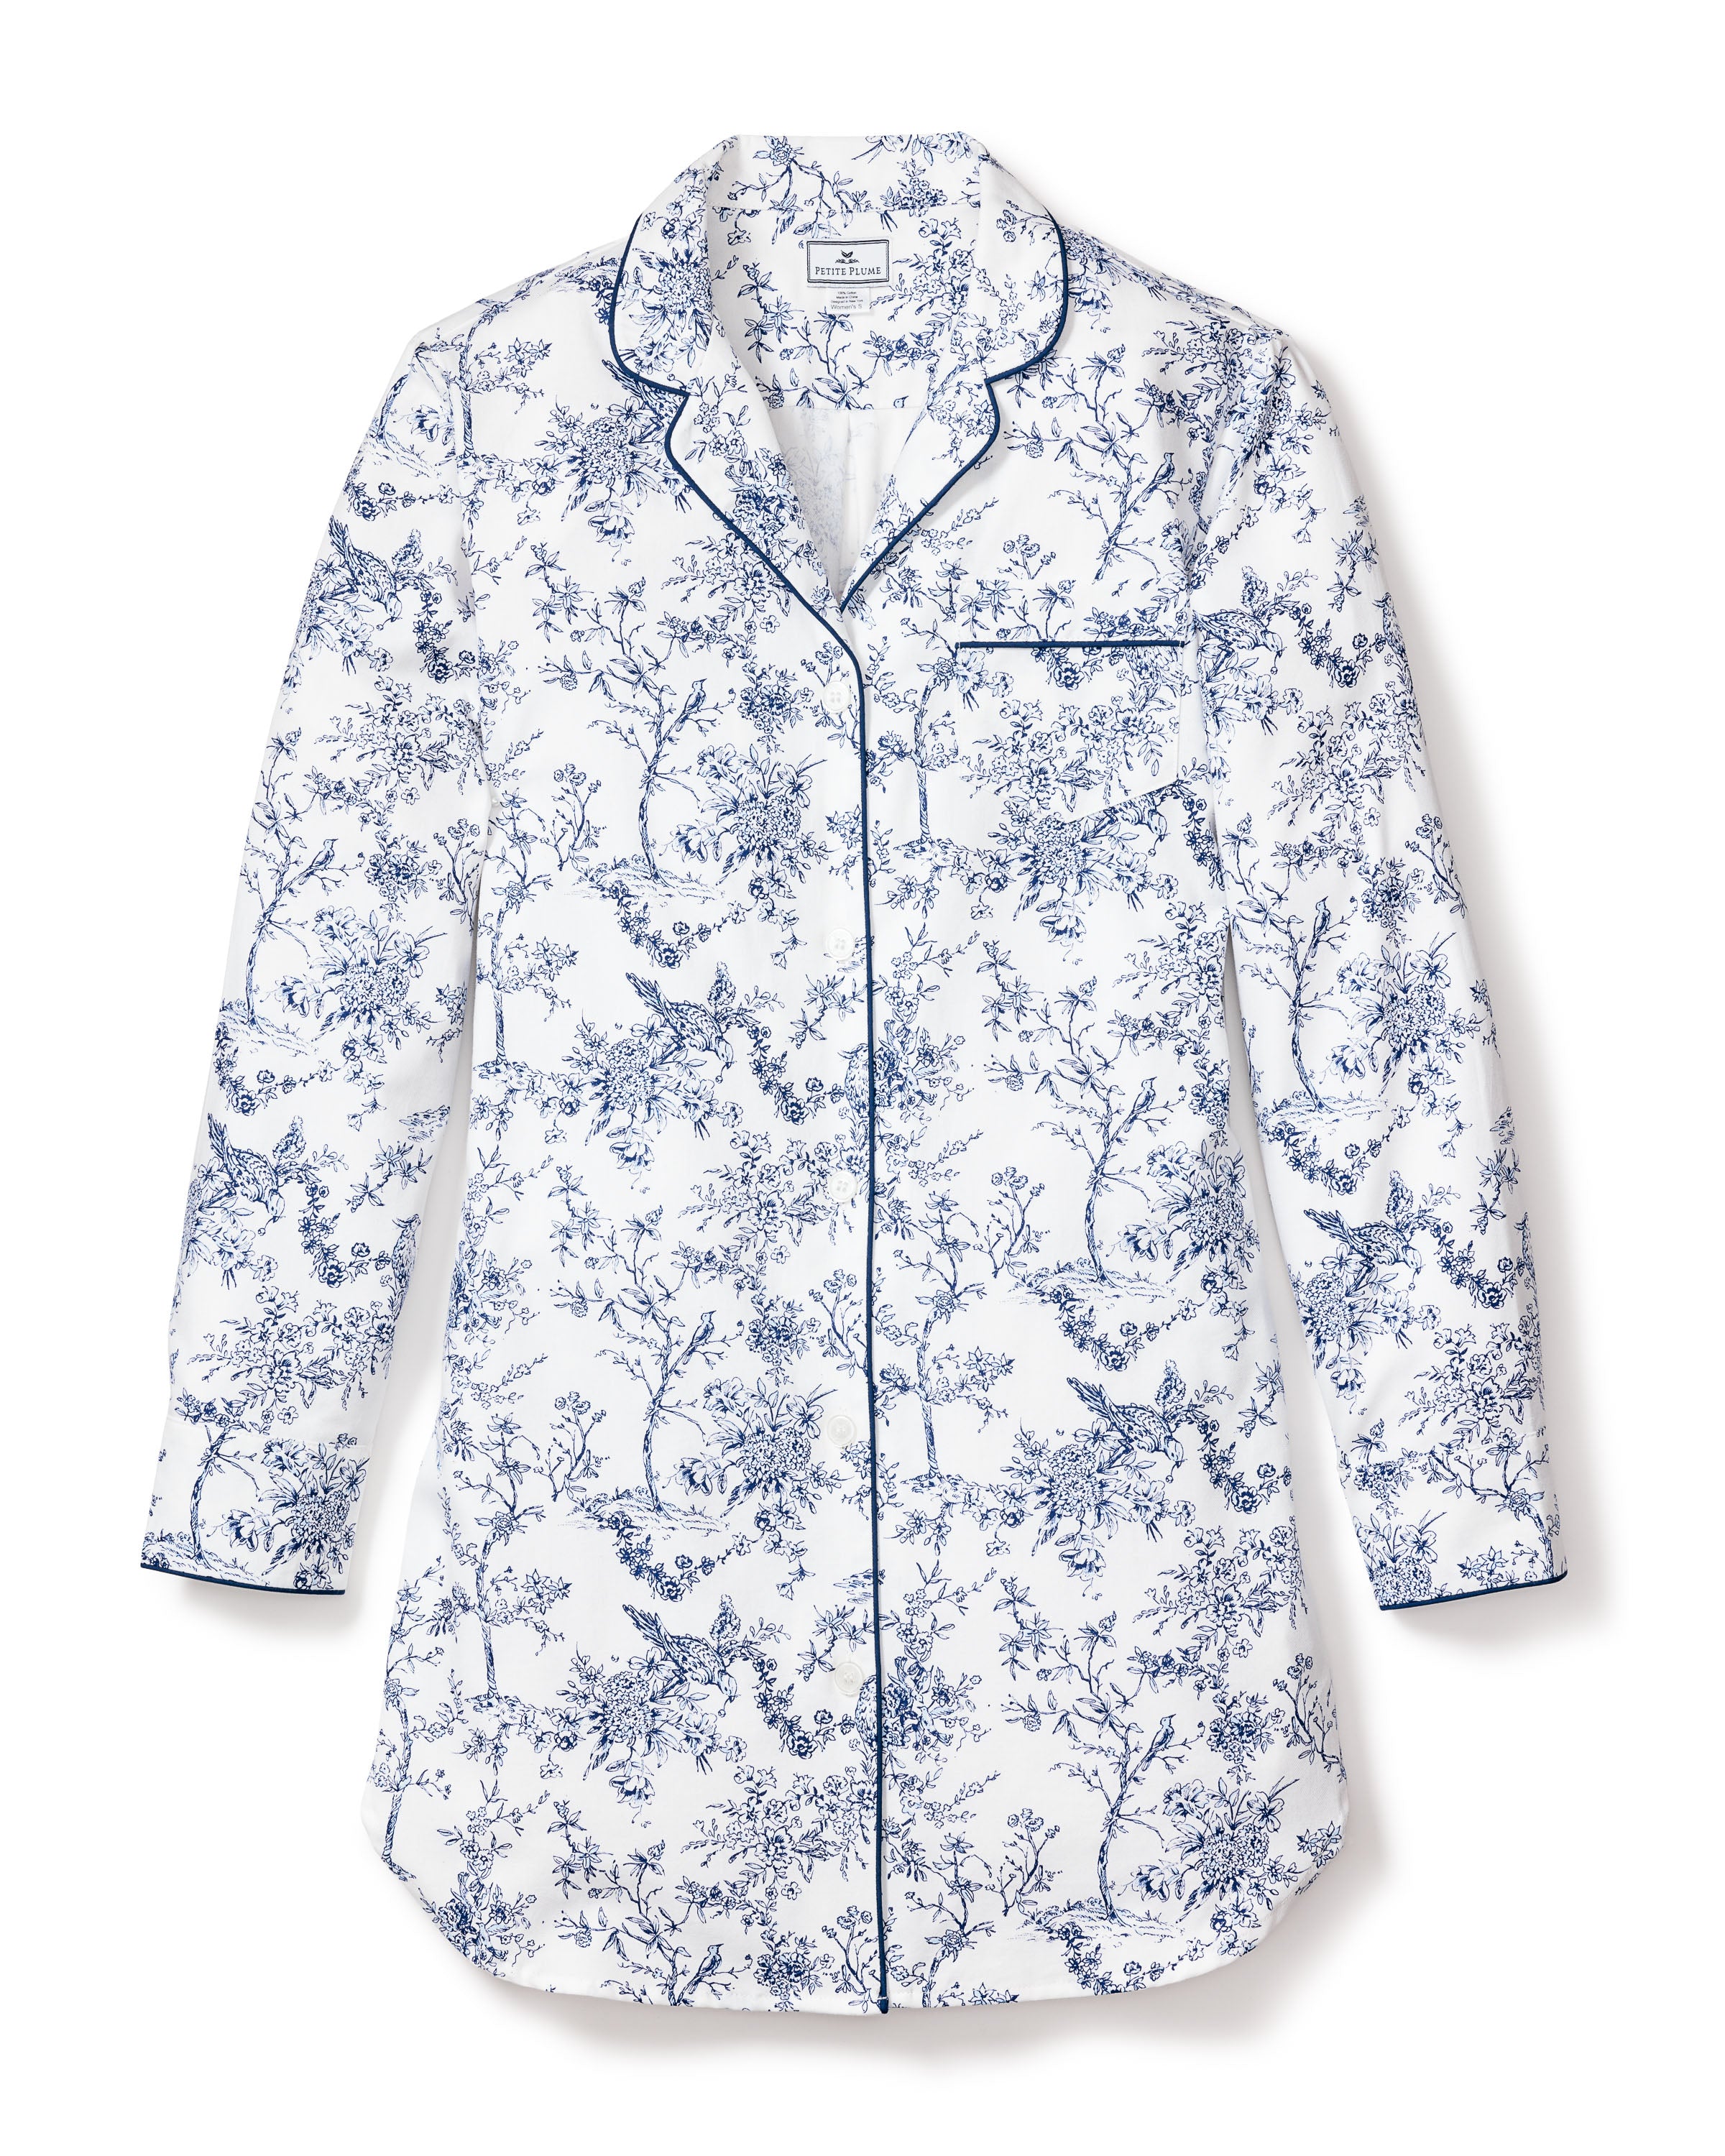 Women's Twill Nightshirt in Timeless Toile